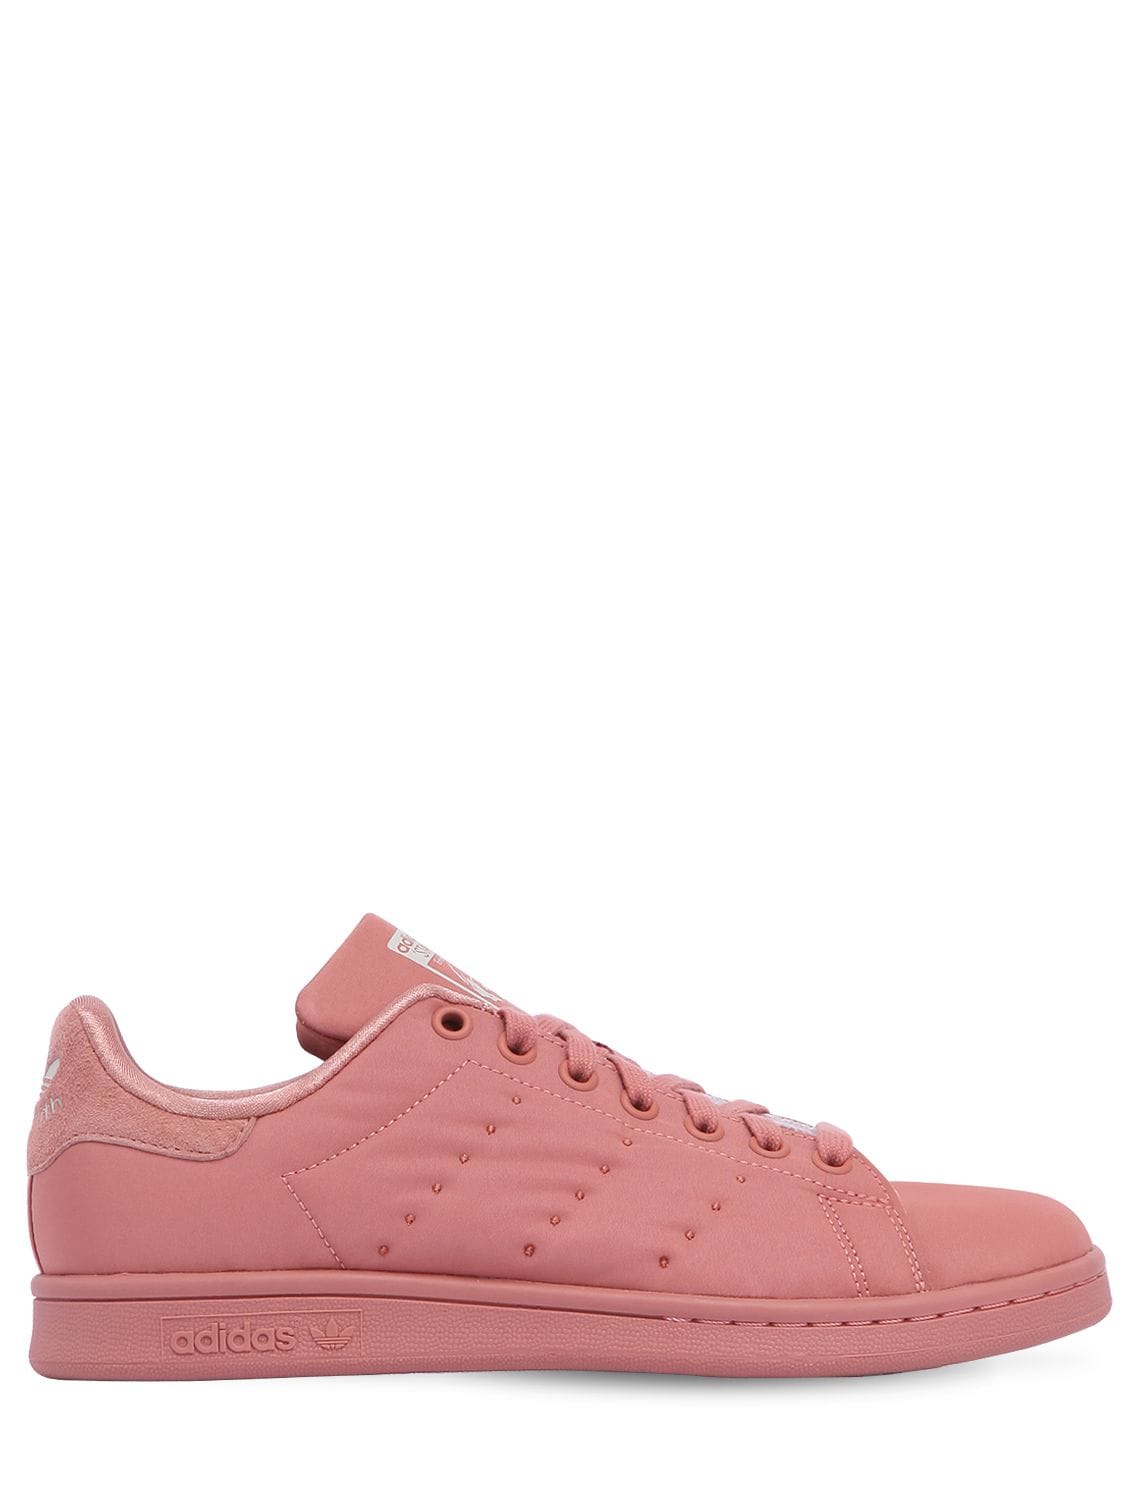 Adidas Originals Stan Smith Padded Satin Sneakers In Rose